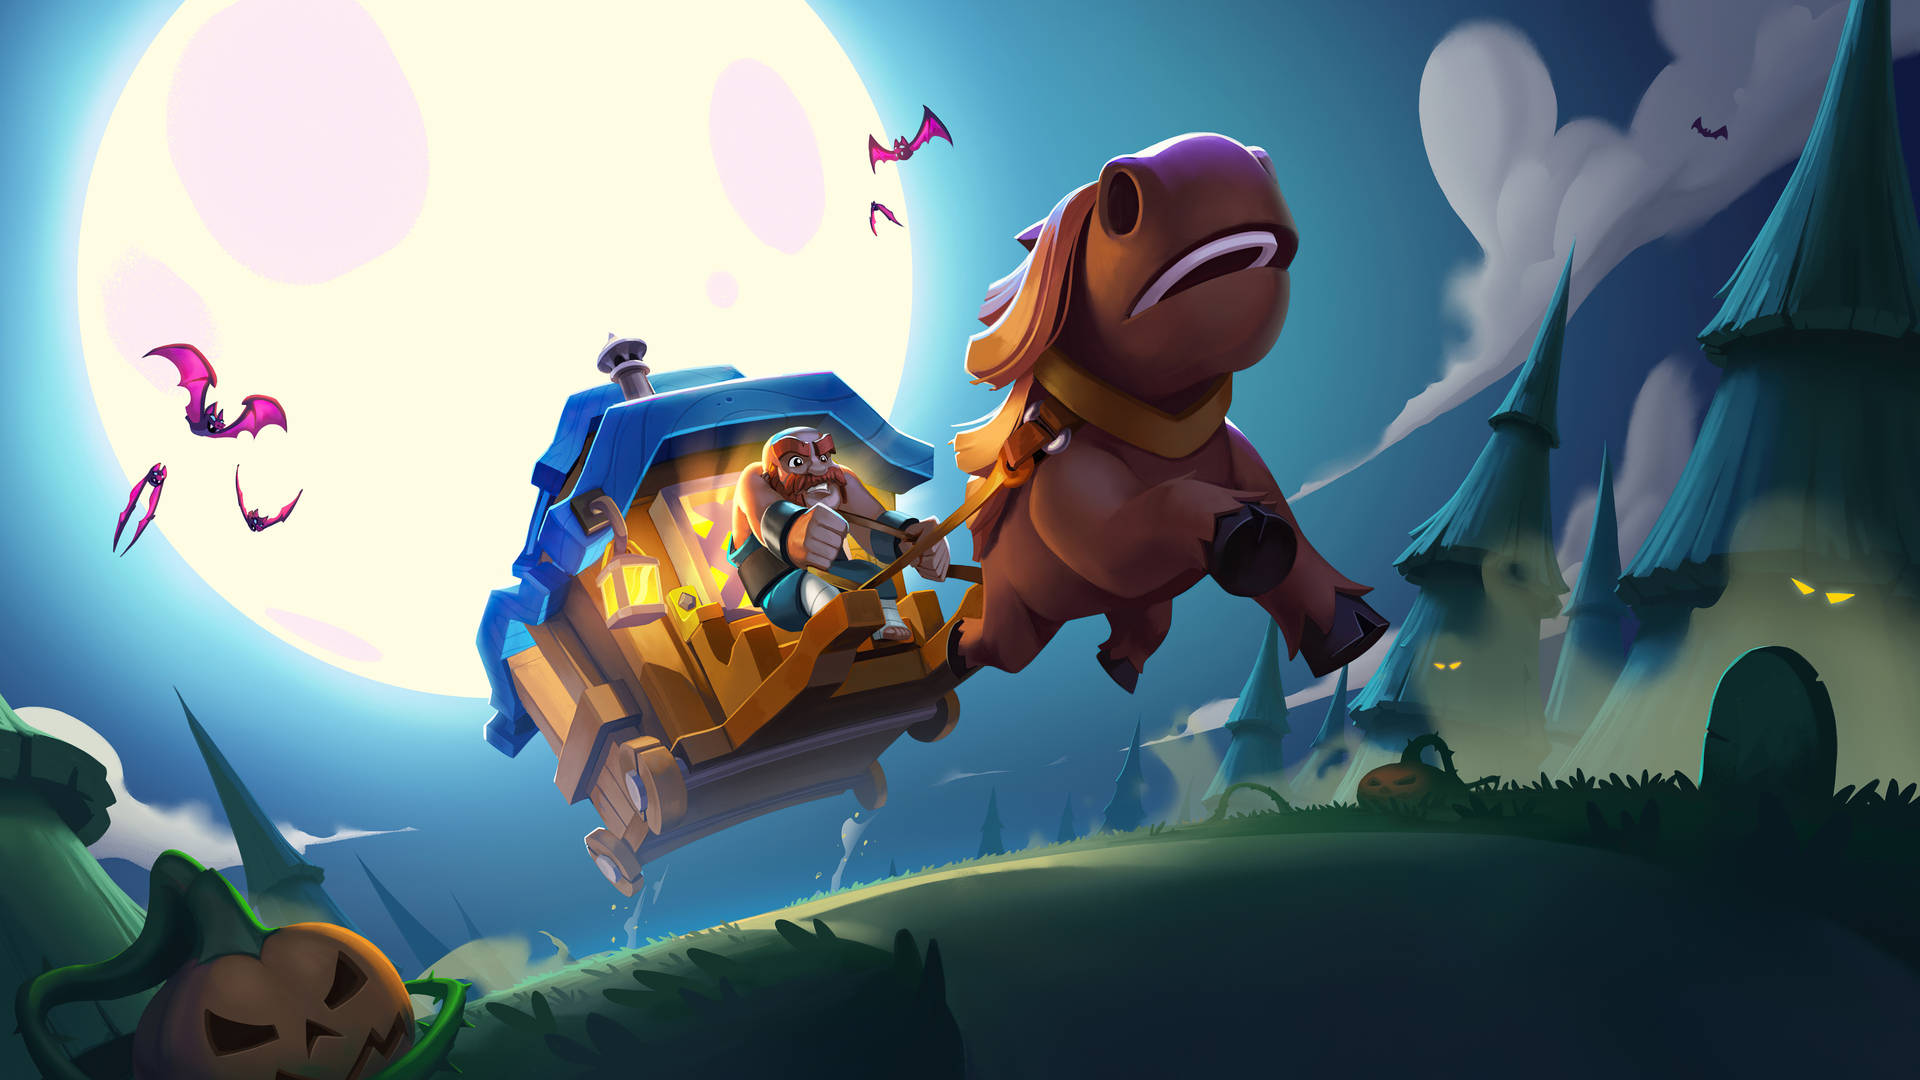 Giant Riding A Wagon Clash Of Clans Background